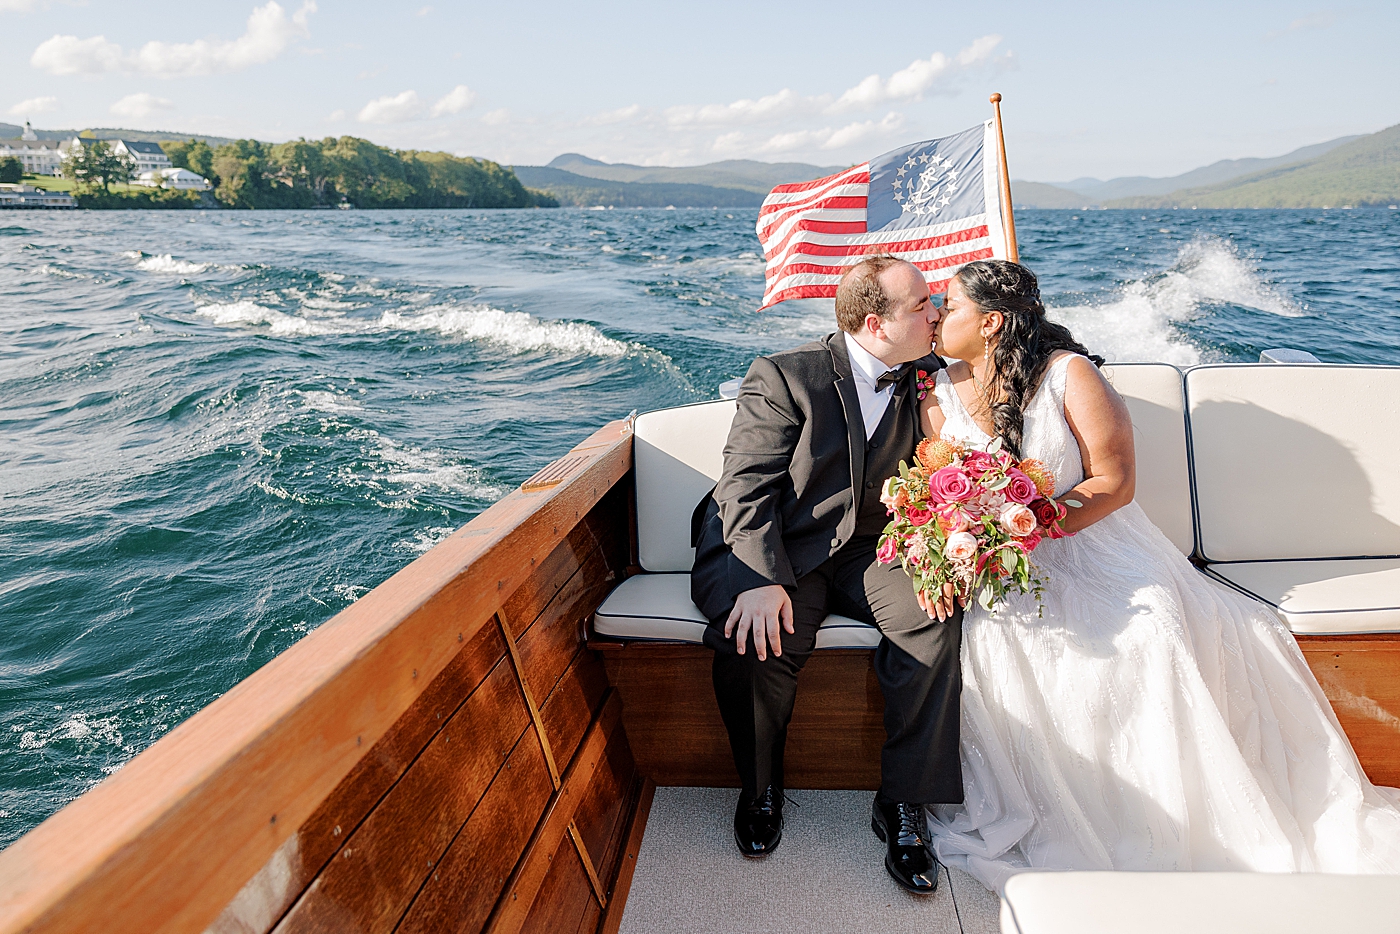 Bride and groom kissing in the back of a wooden boat with white cushions | Image by Hope Helmuth Photography